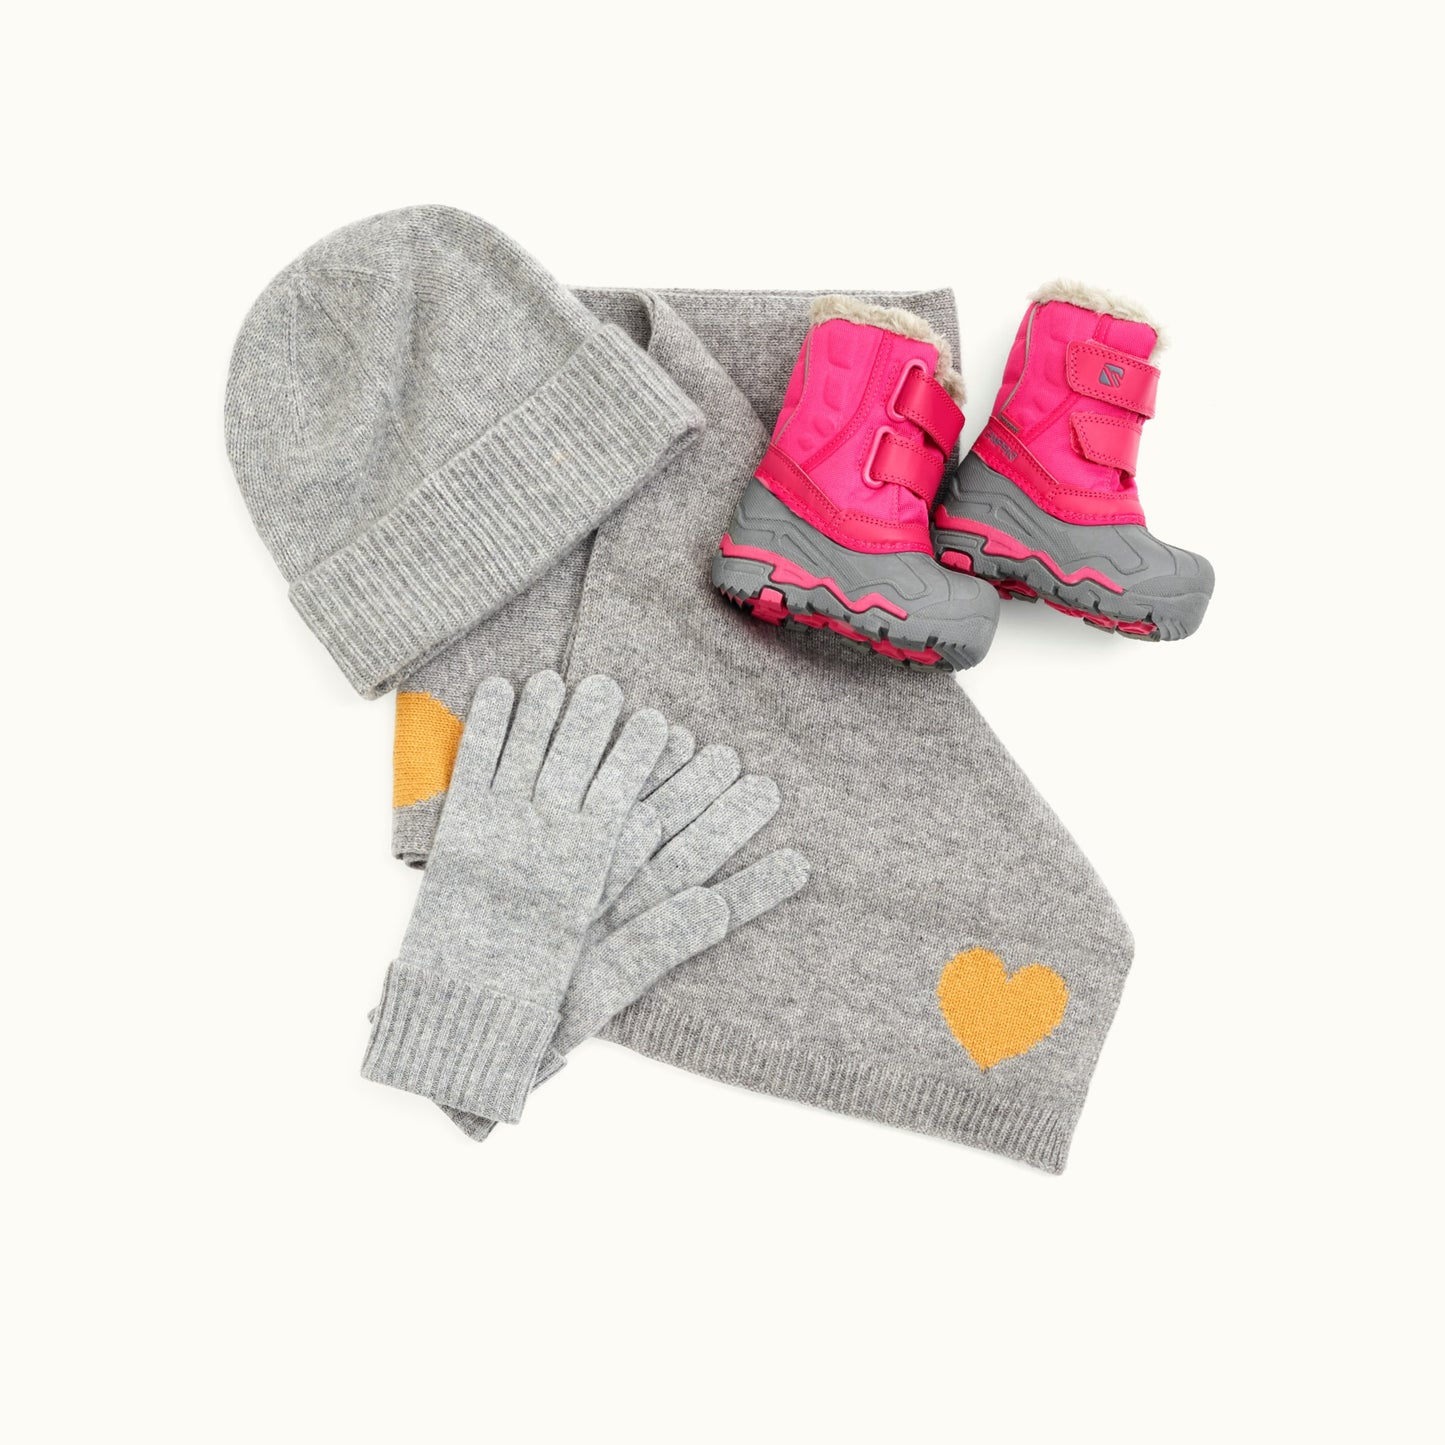 Winter set for children consisting of hat, scarf, gloves and boots.